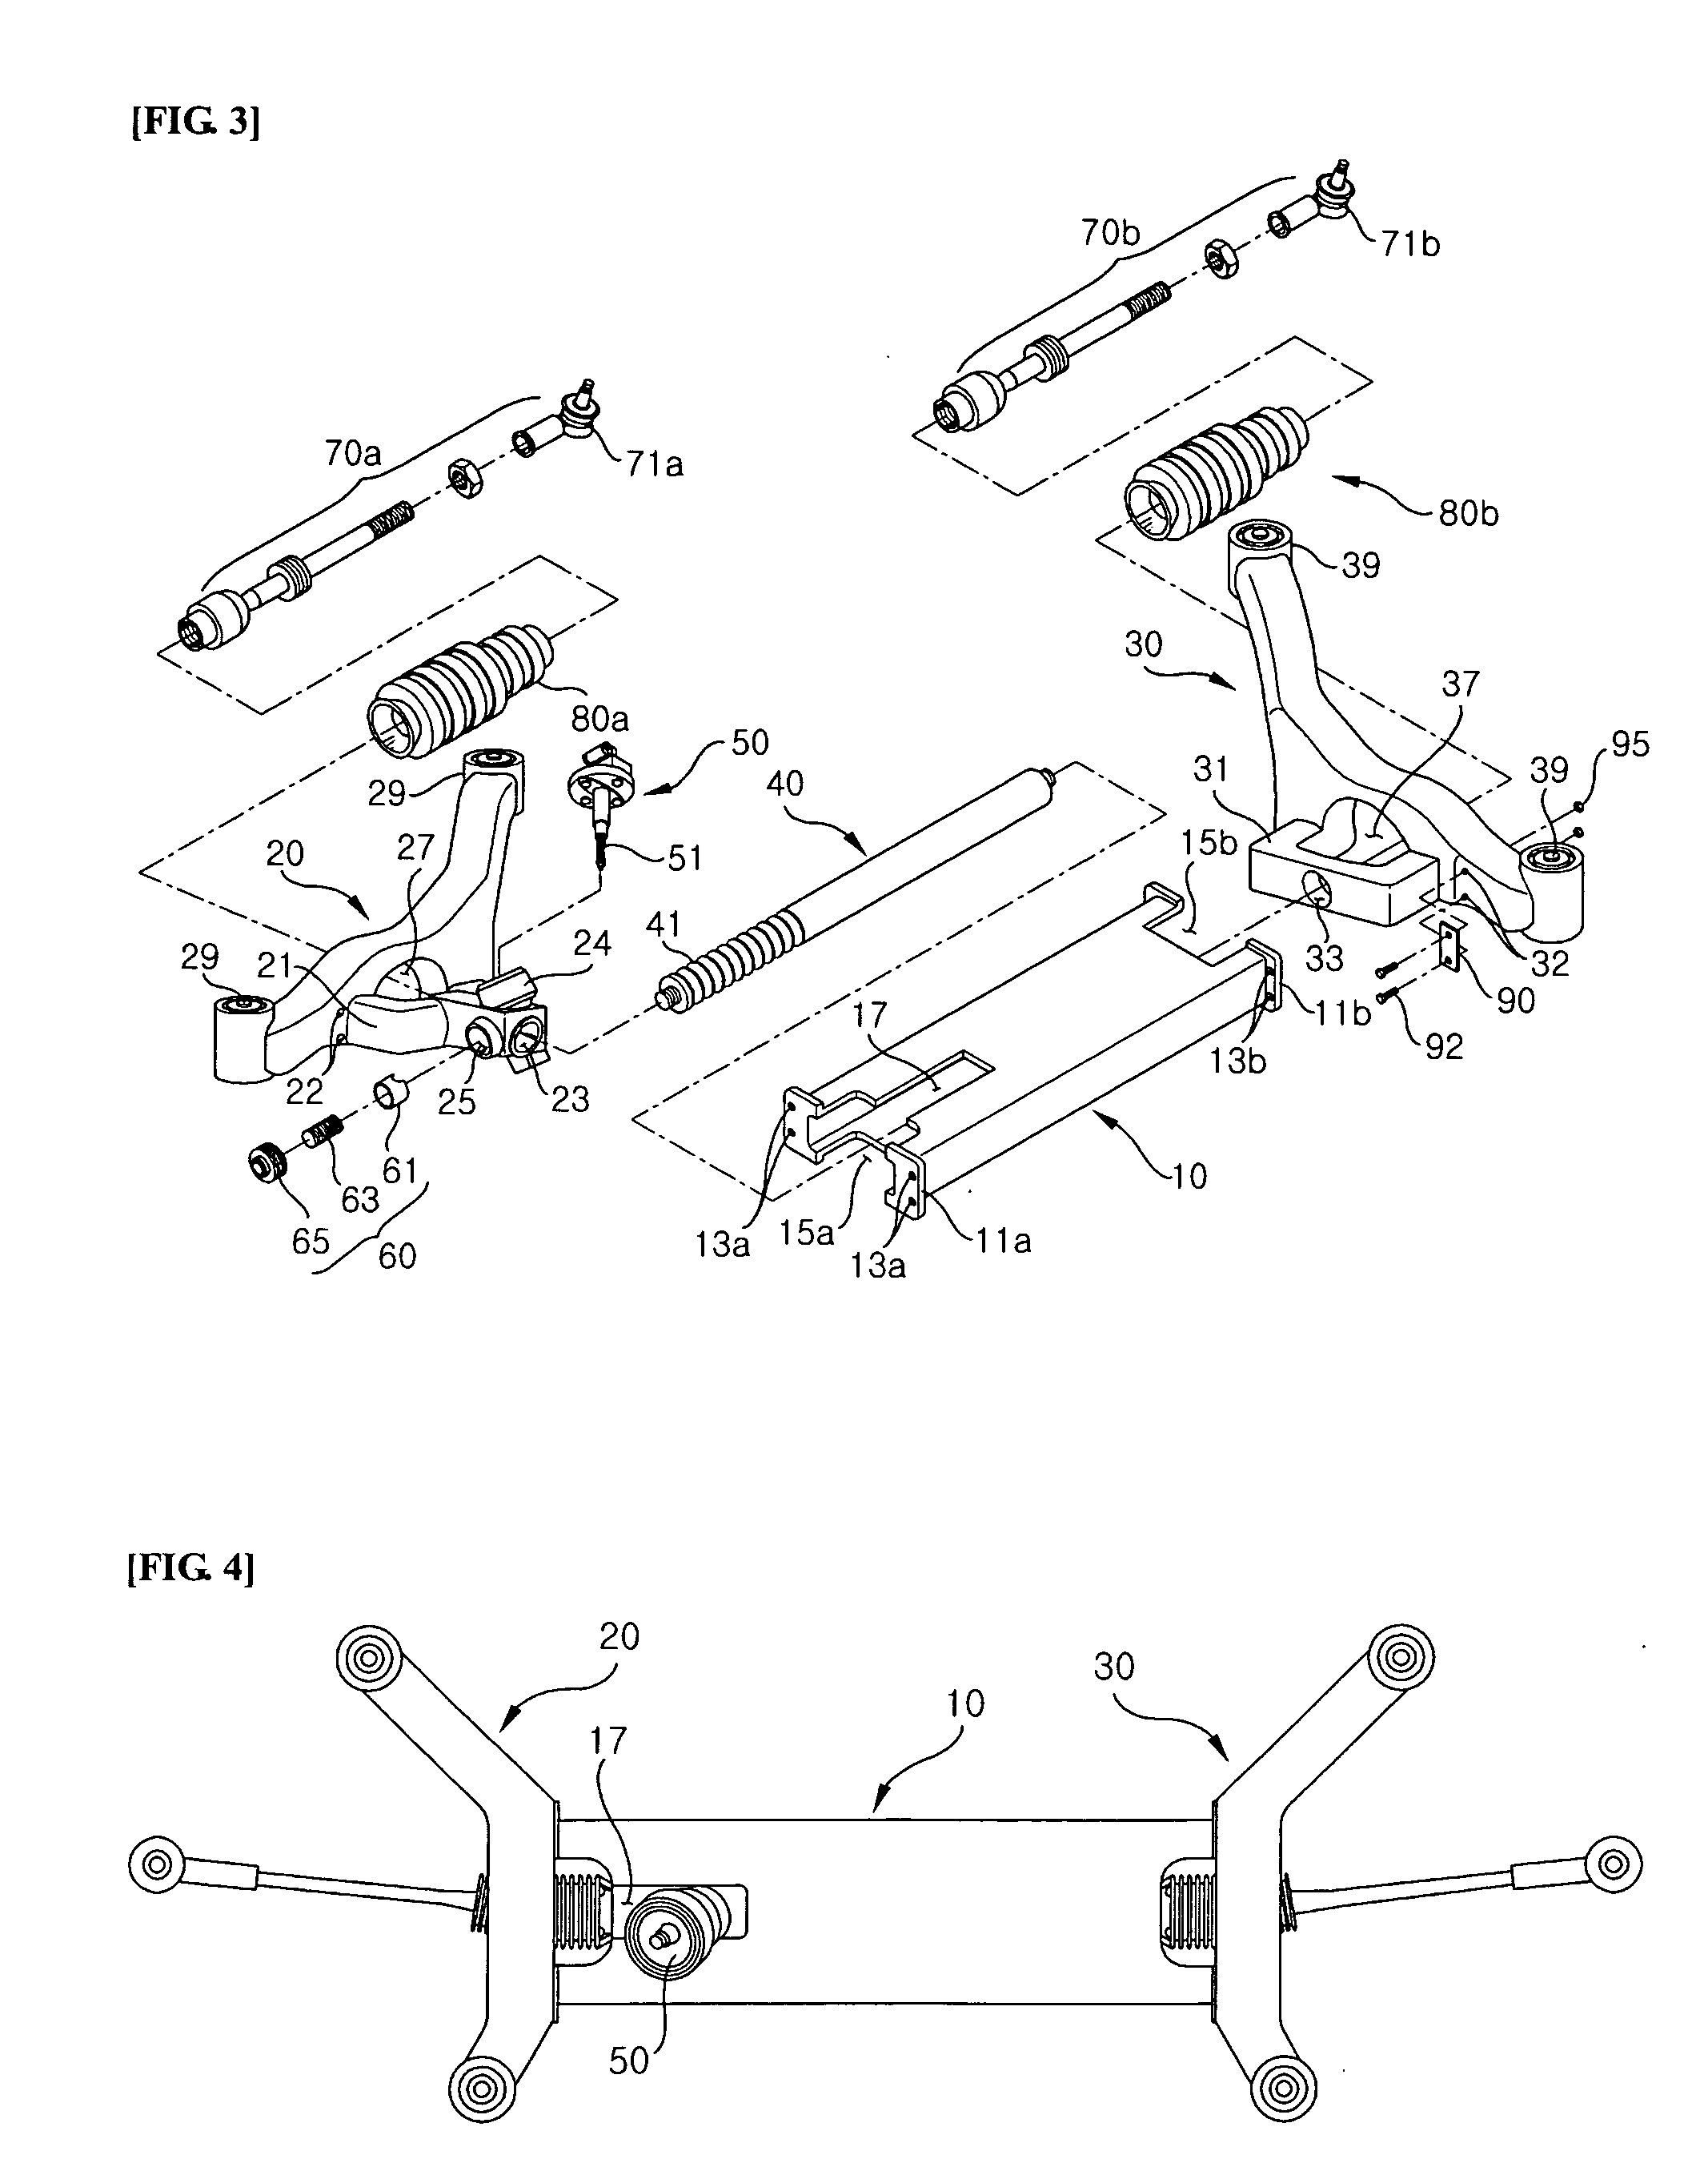 Integrated steering gear and frame structure